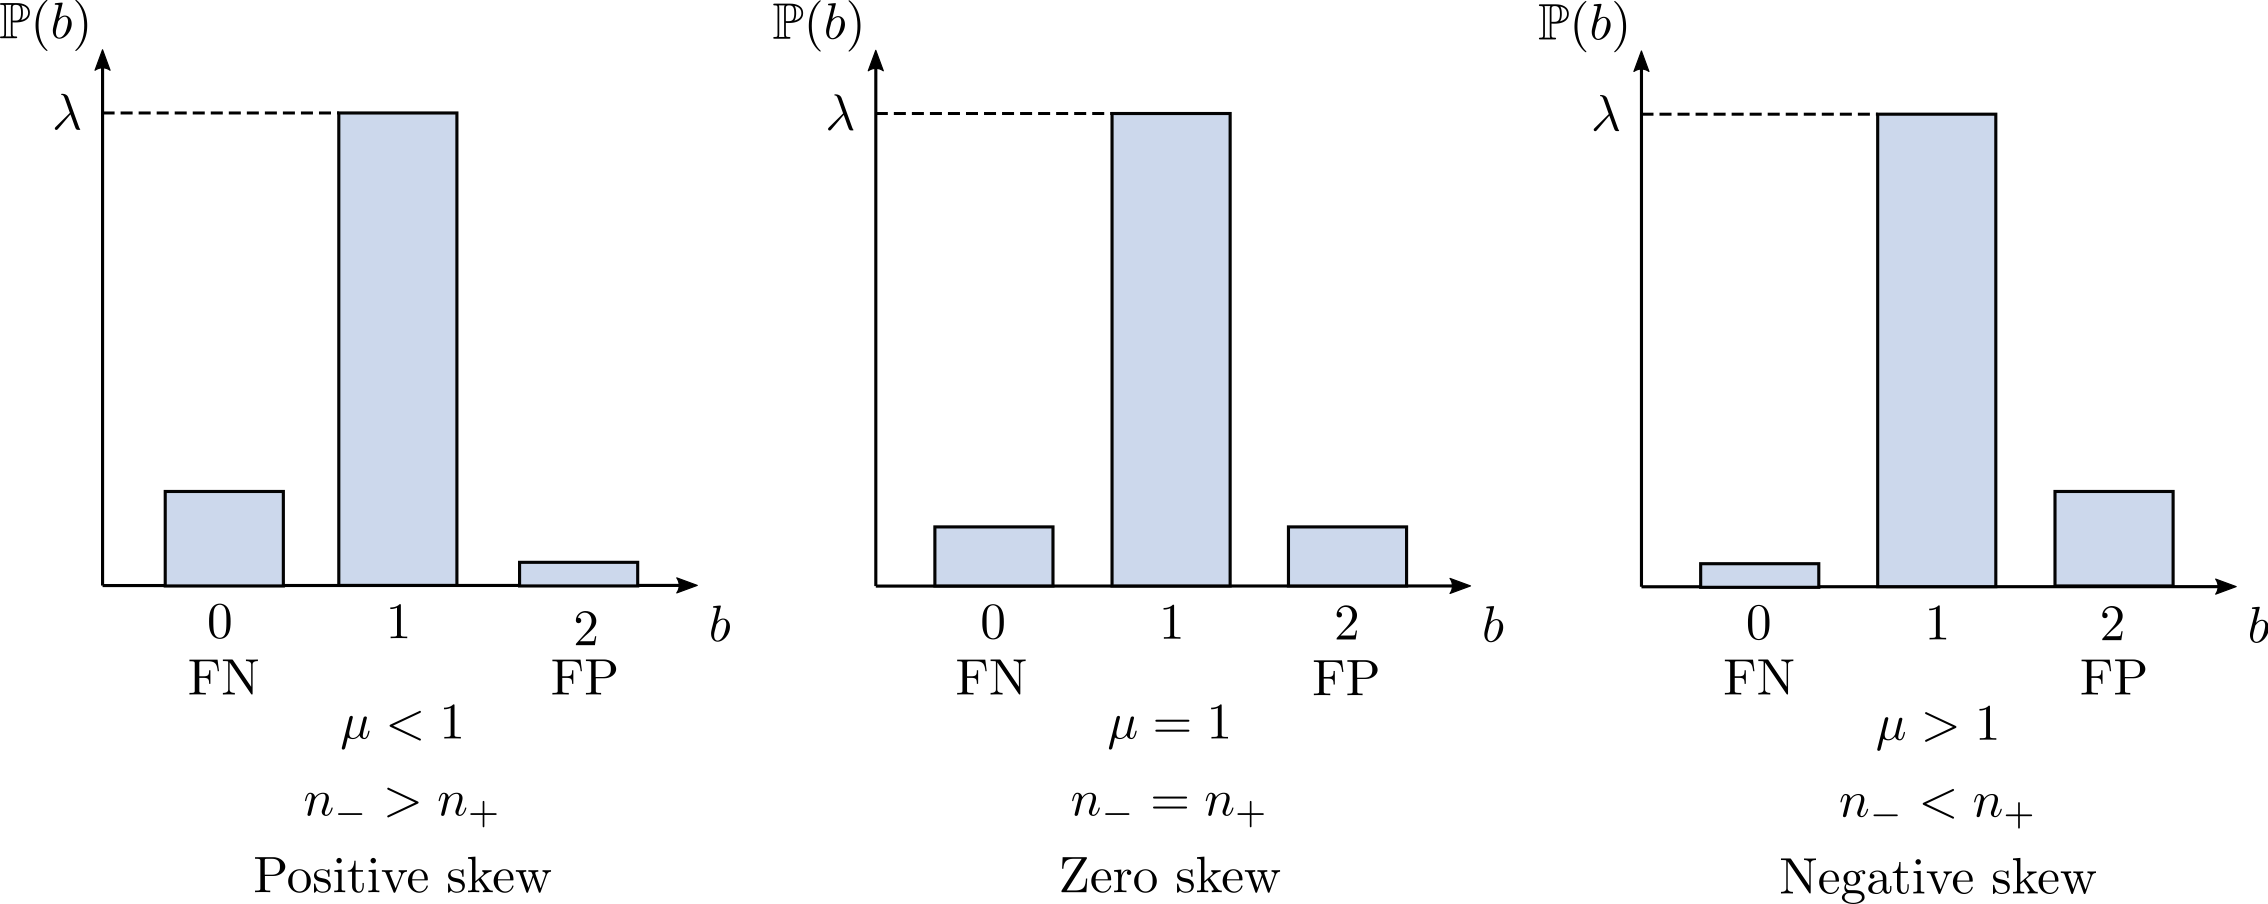 Figure 5.6: Characterisation of benefit distributions with different mean benefits.